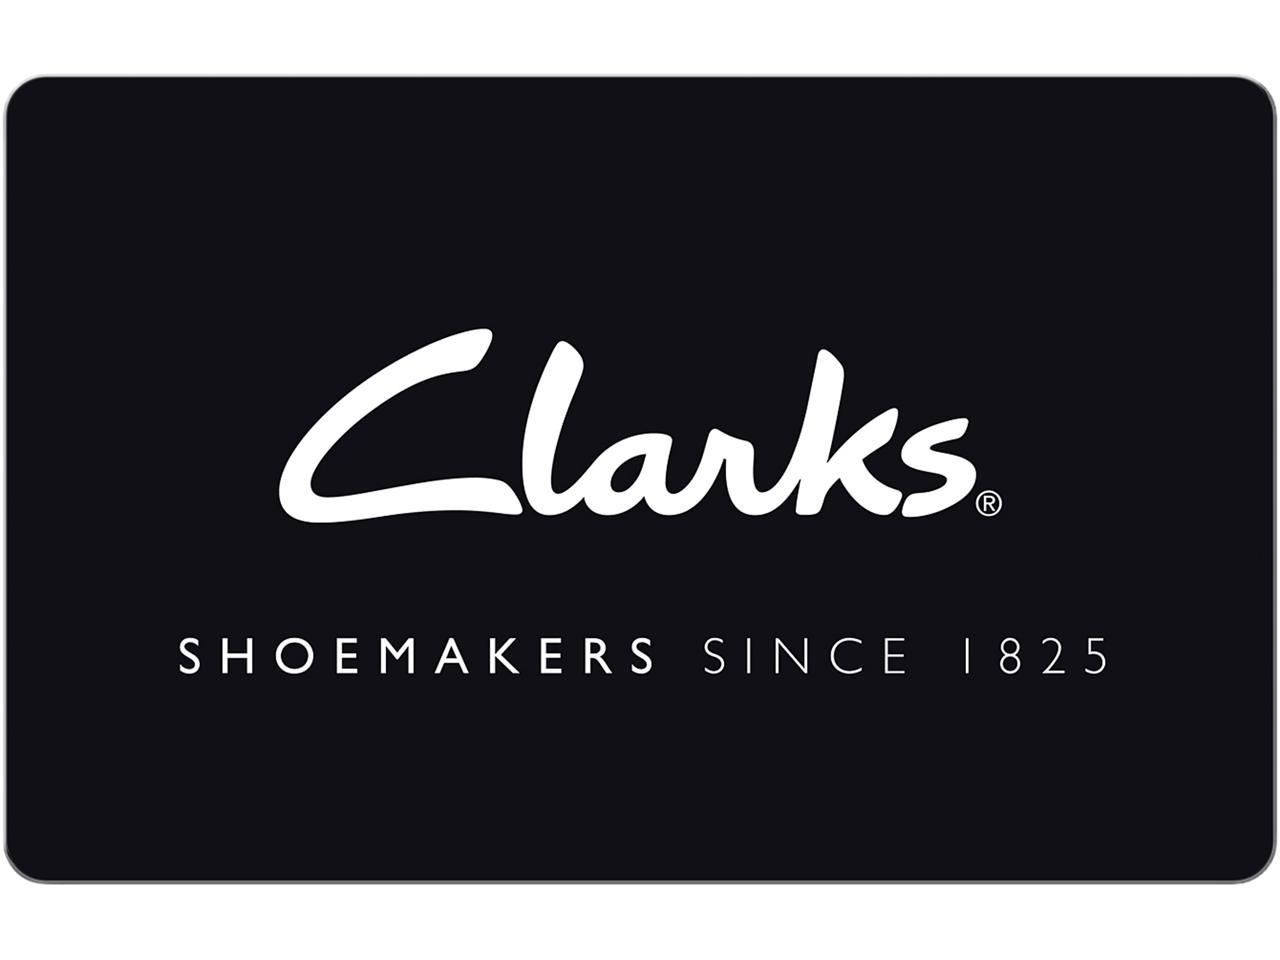 clarks delivery service